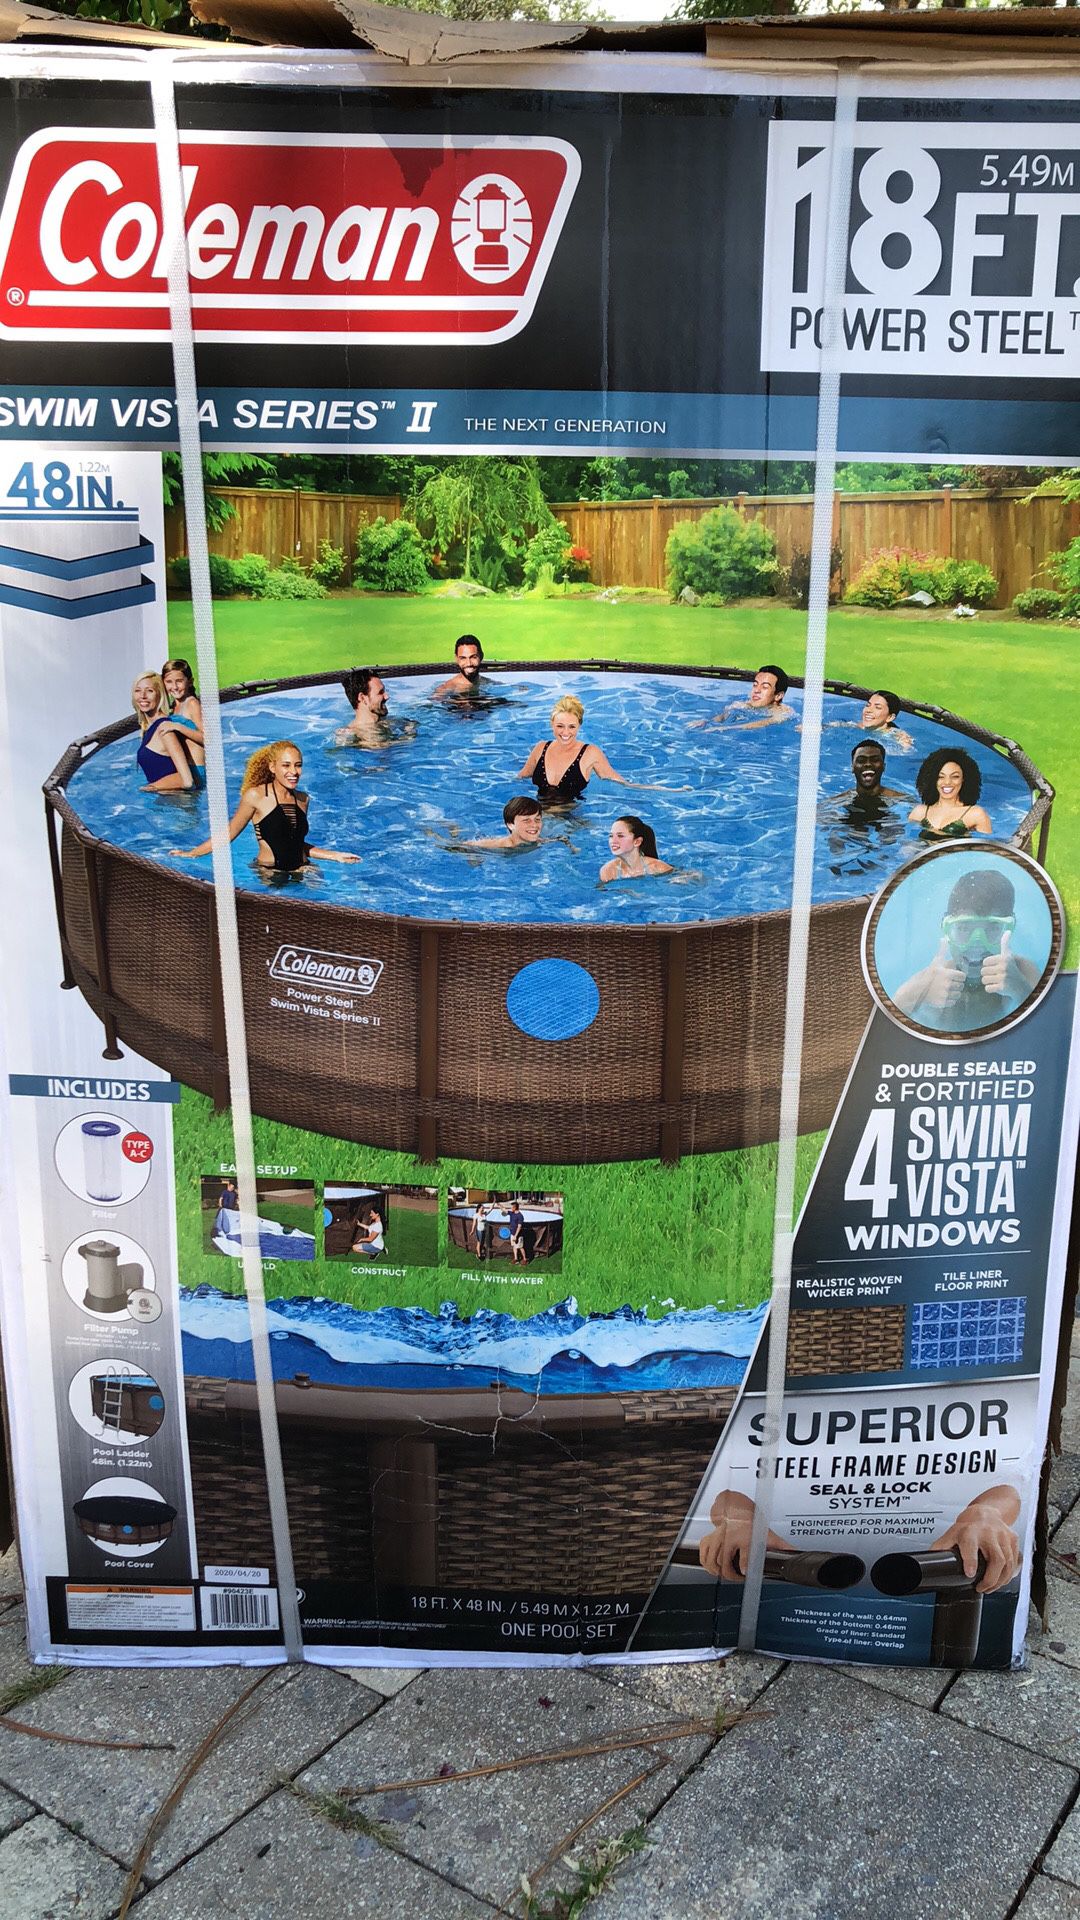 18ft x 48in Power Steel Metal Frame Above Ground Swimming Pool